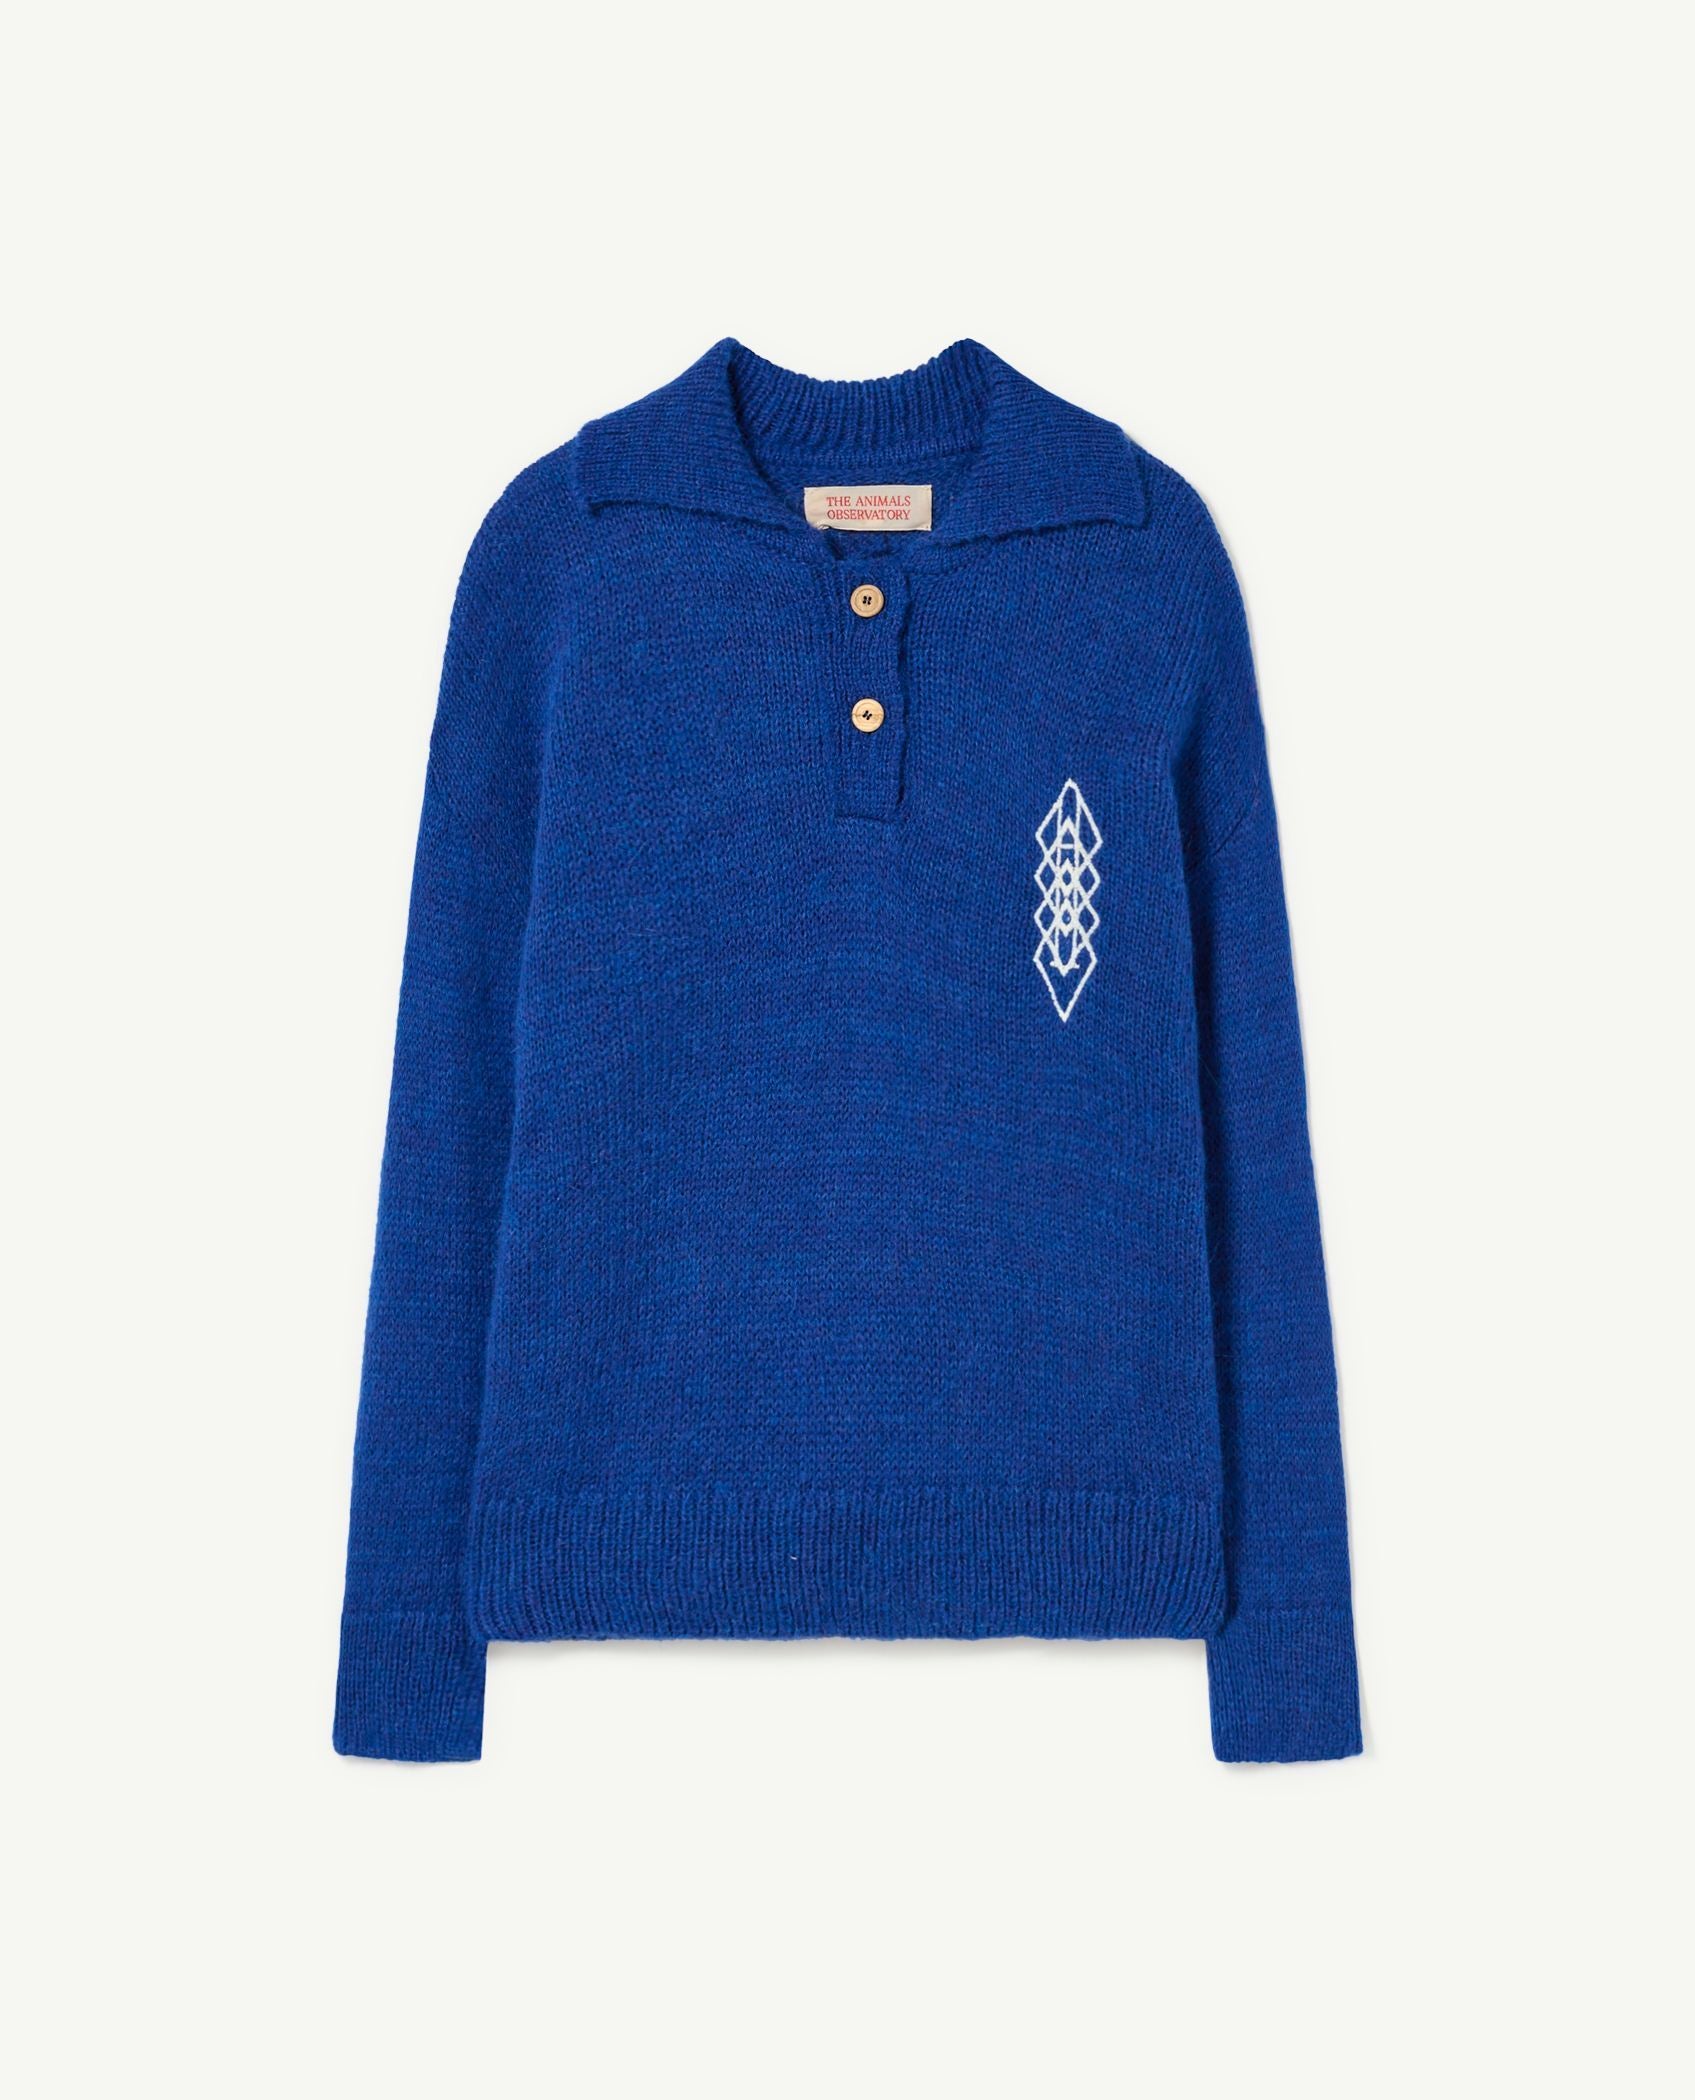 Blue Raven Sweater PRODUCT FRONT